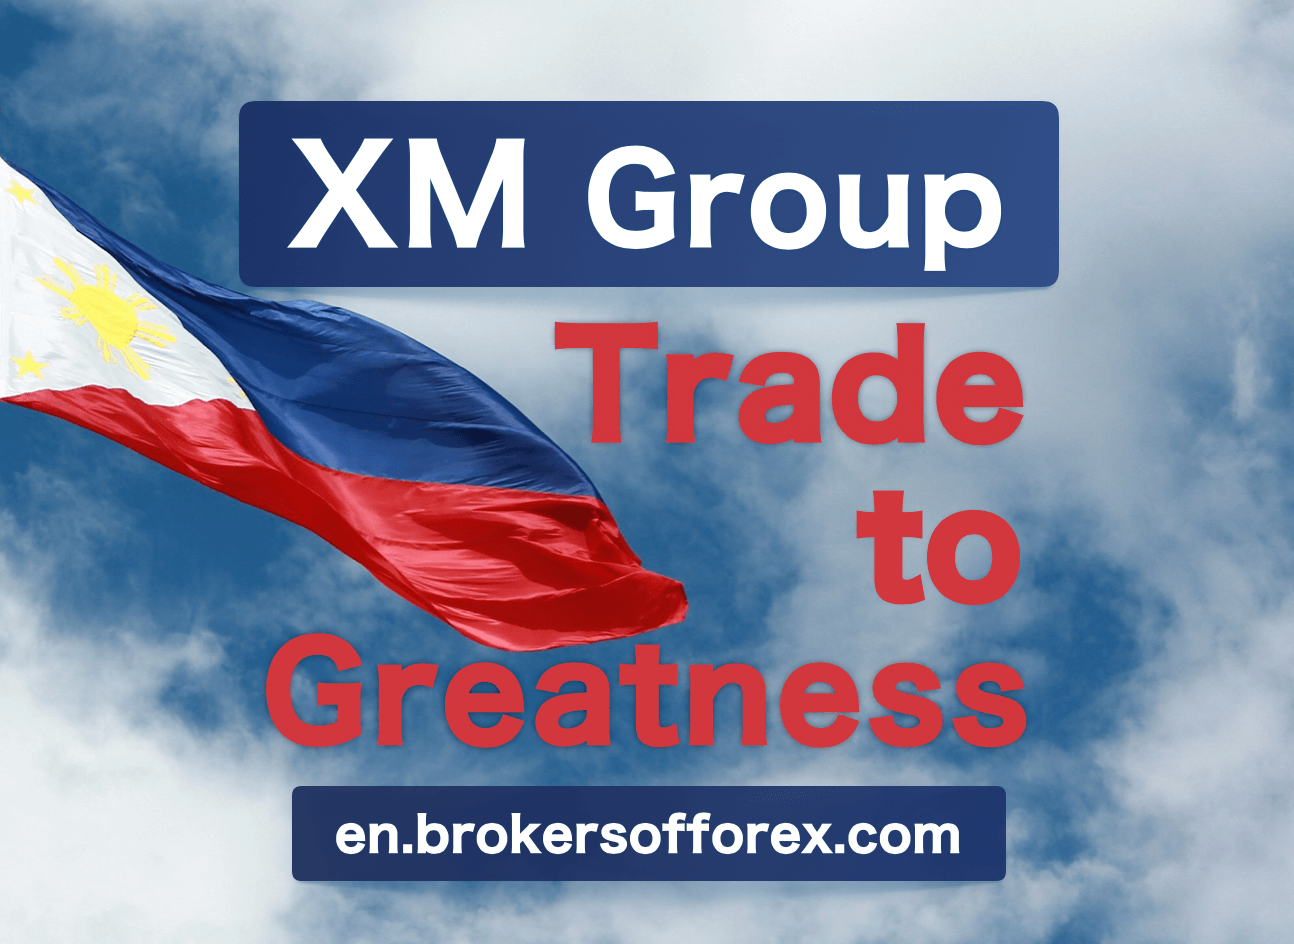 XM Group Trade to Greatness Philippines